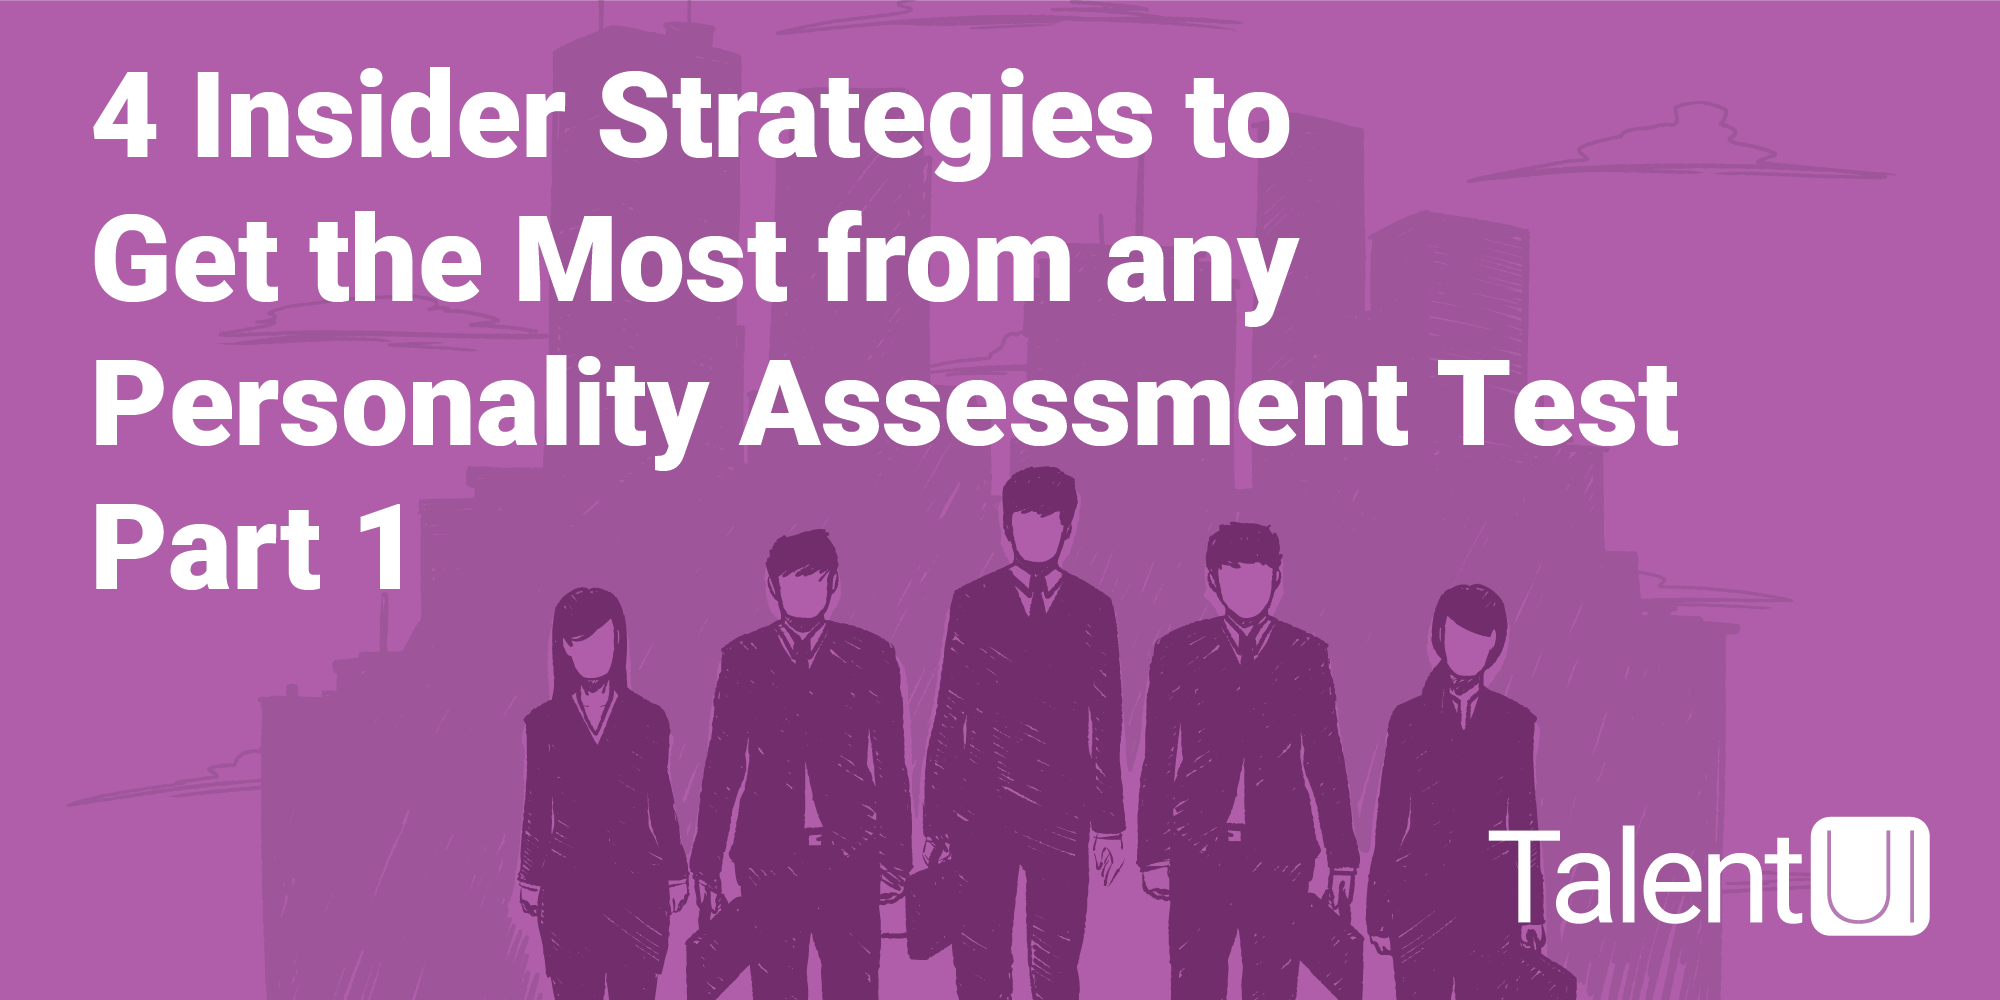 4 Insider Strategies To Get The Most From Any Personality Assessment Test Part 1 